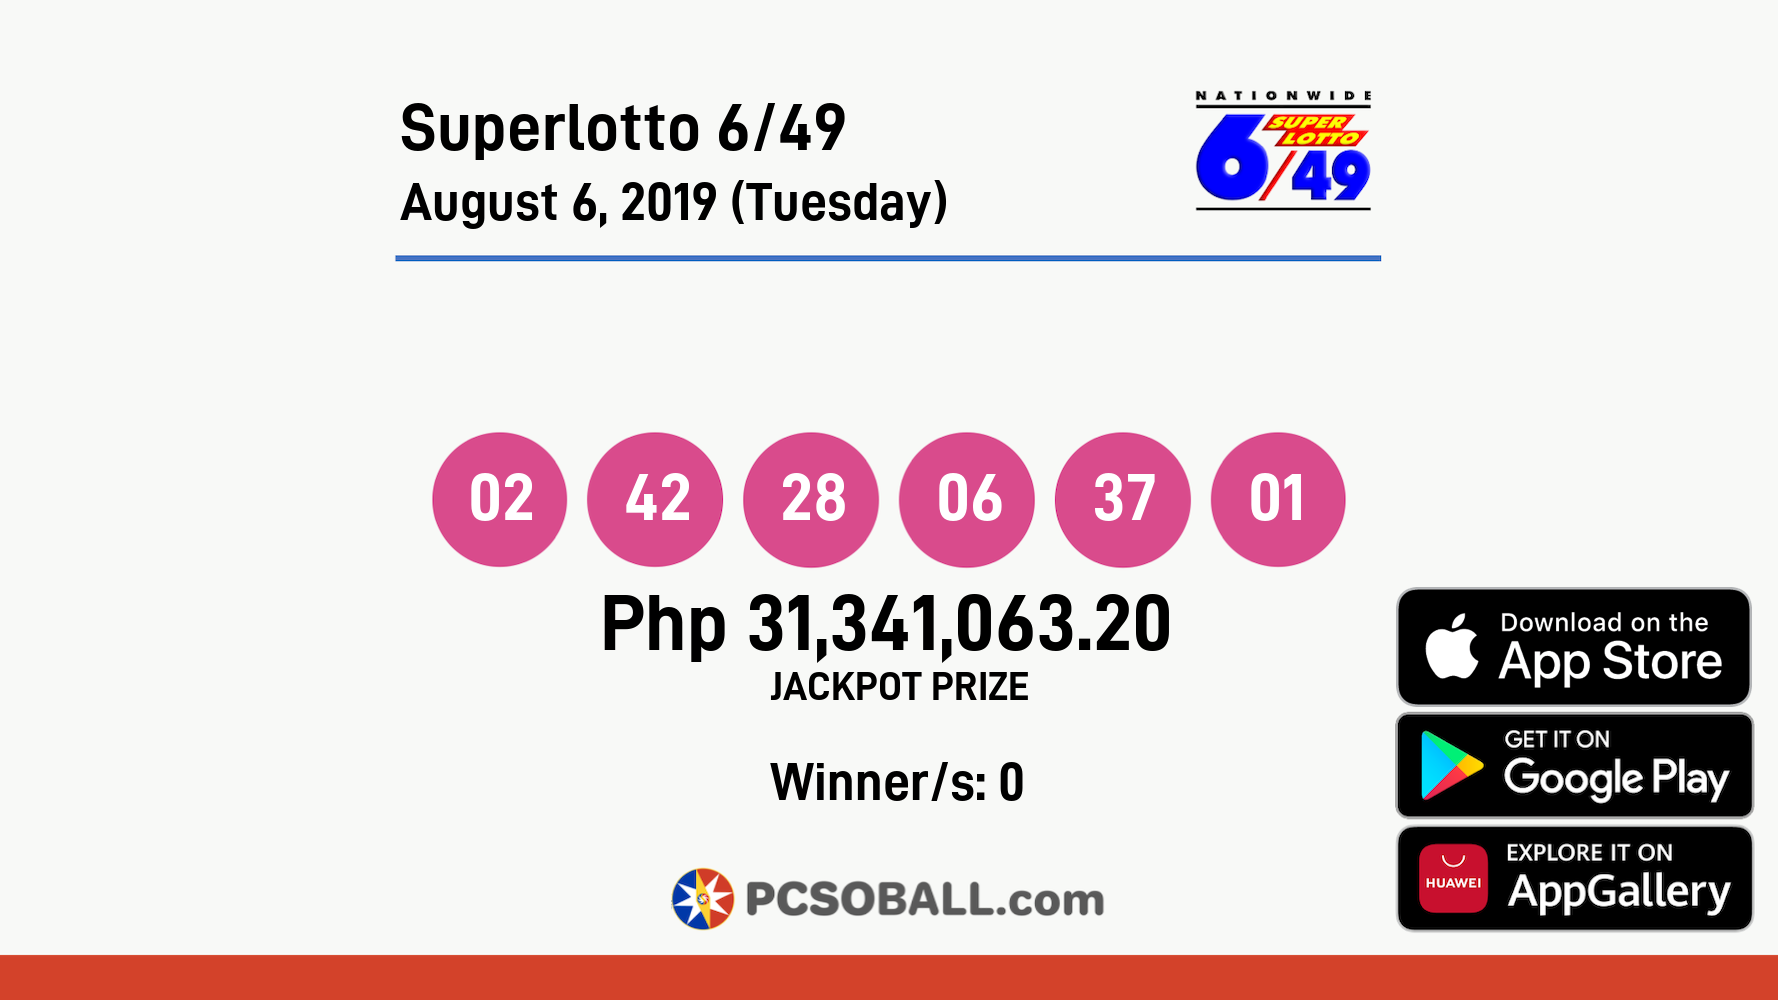 Superlotto 6/49 August 6, 2019 (Tuesday) Result